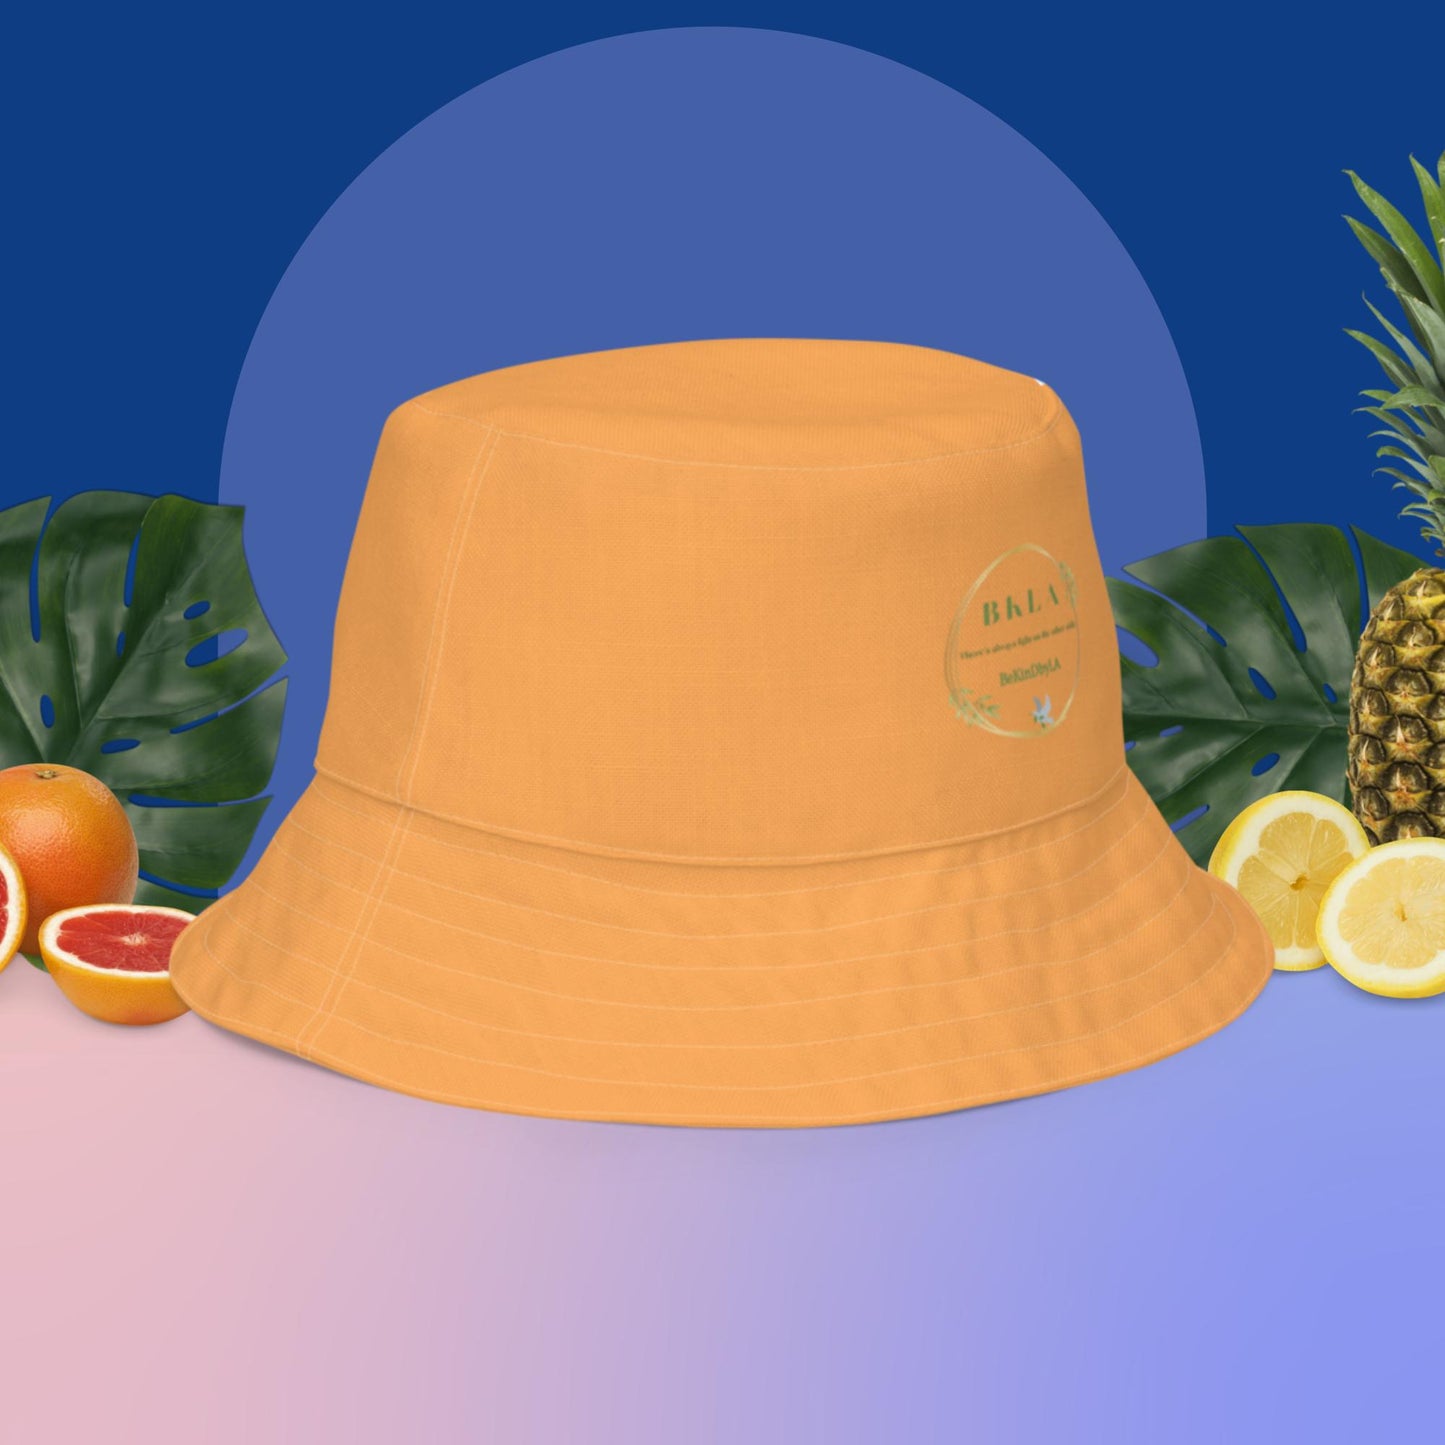 Buckthorn Reversible Bucket Hat | BKLA | Shoes & Accessories | shoes, hats, phone covers, tote bags, clutch bags